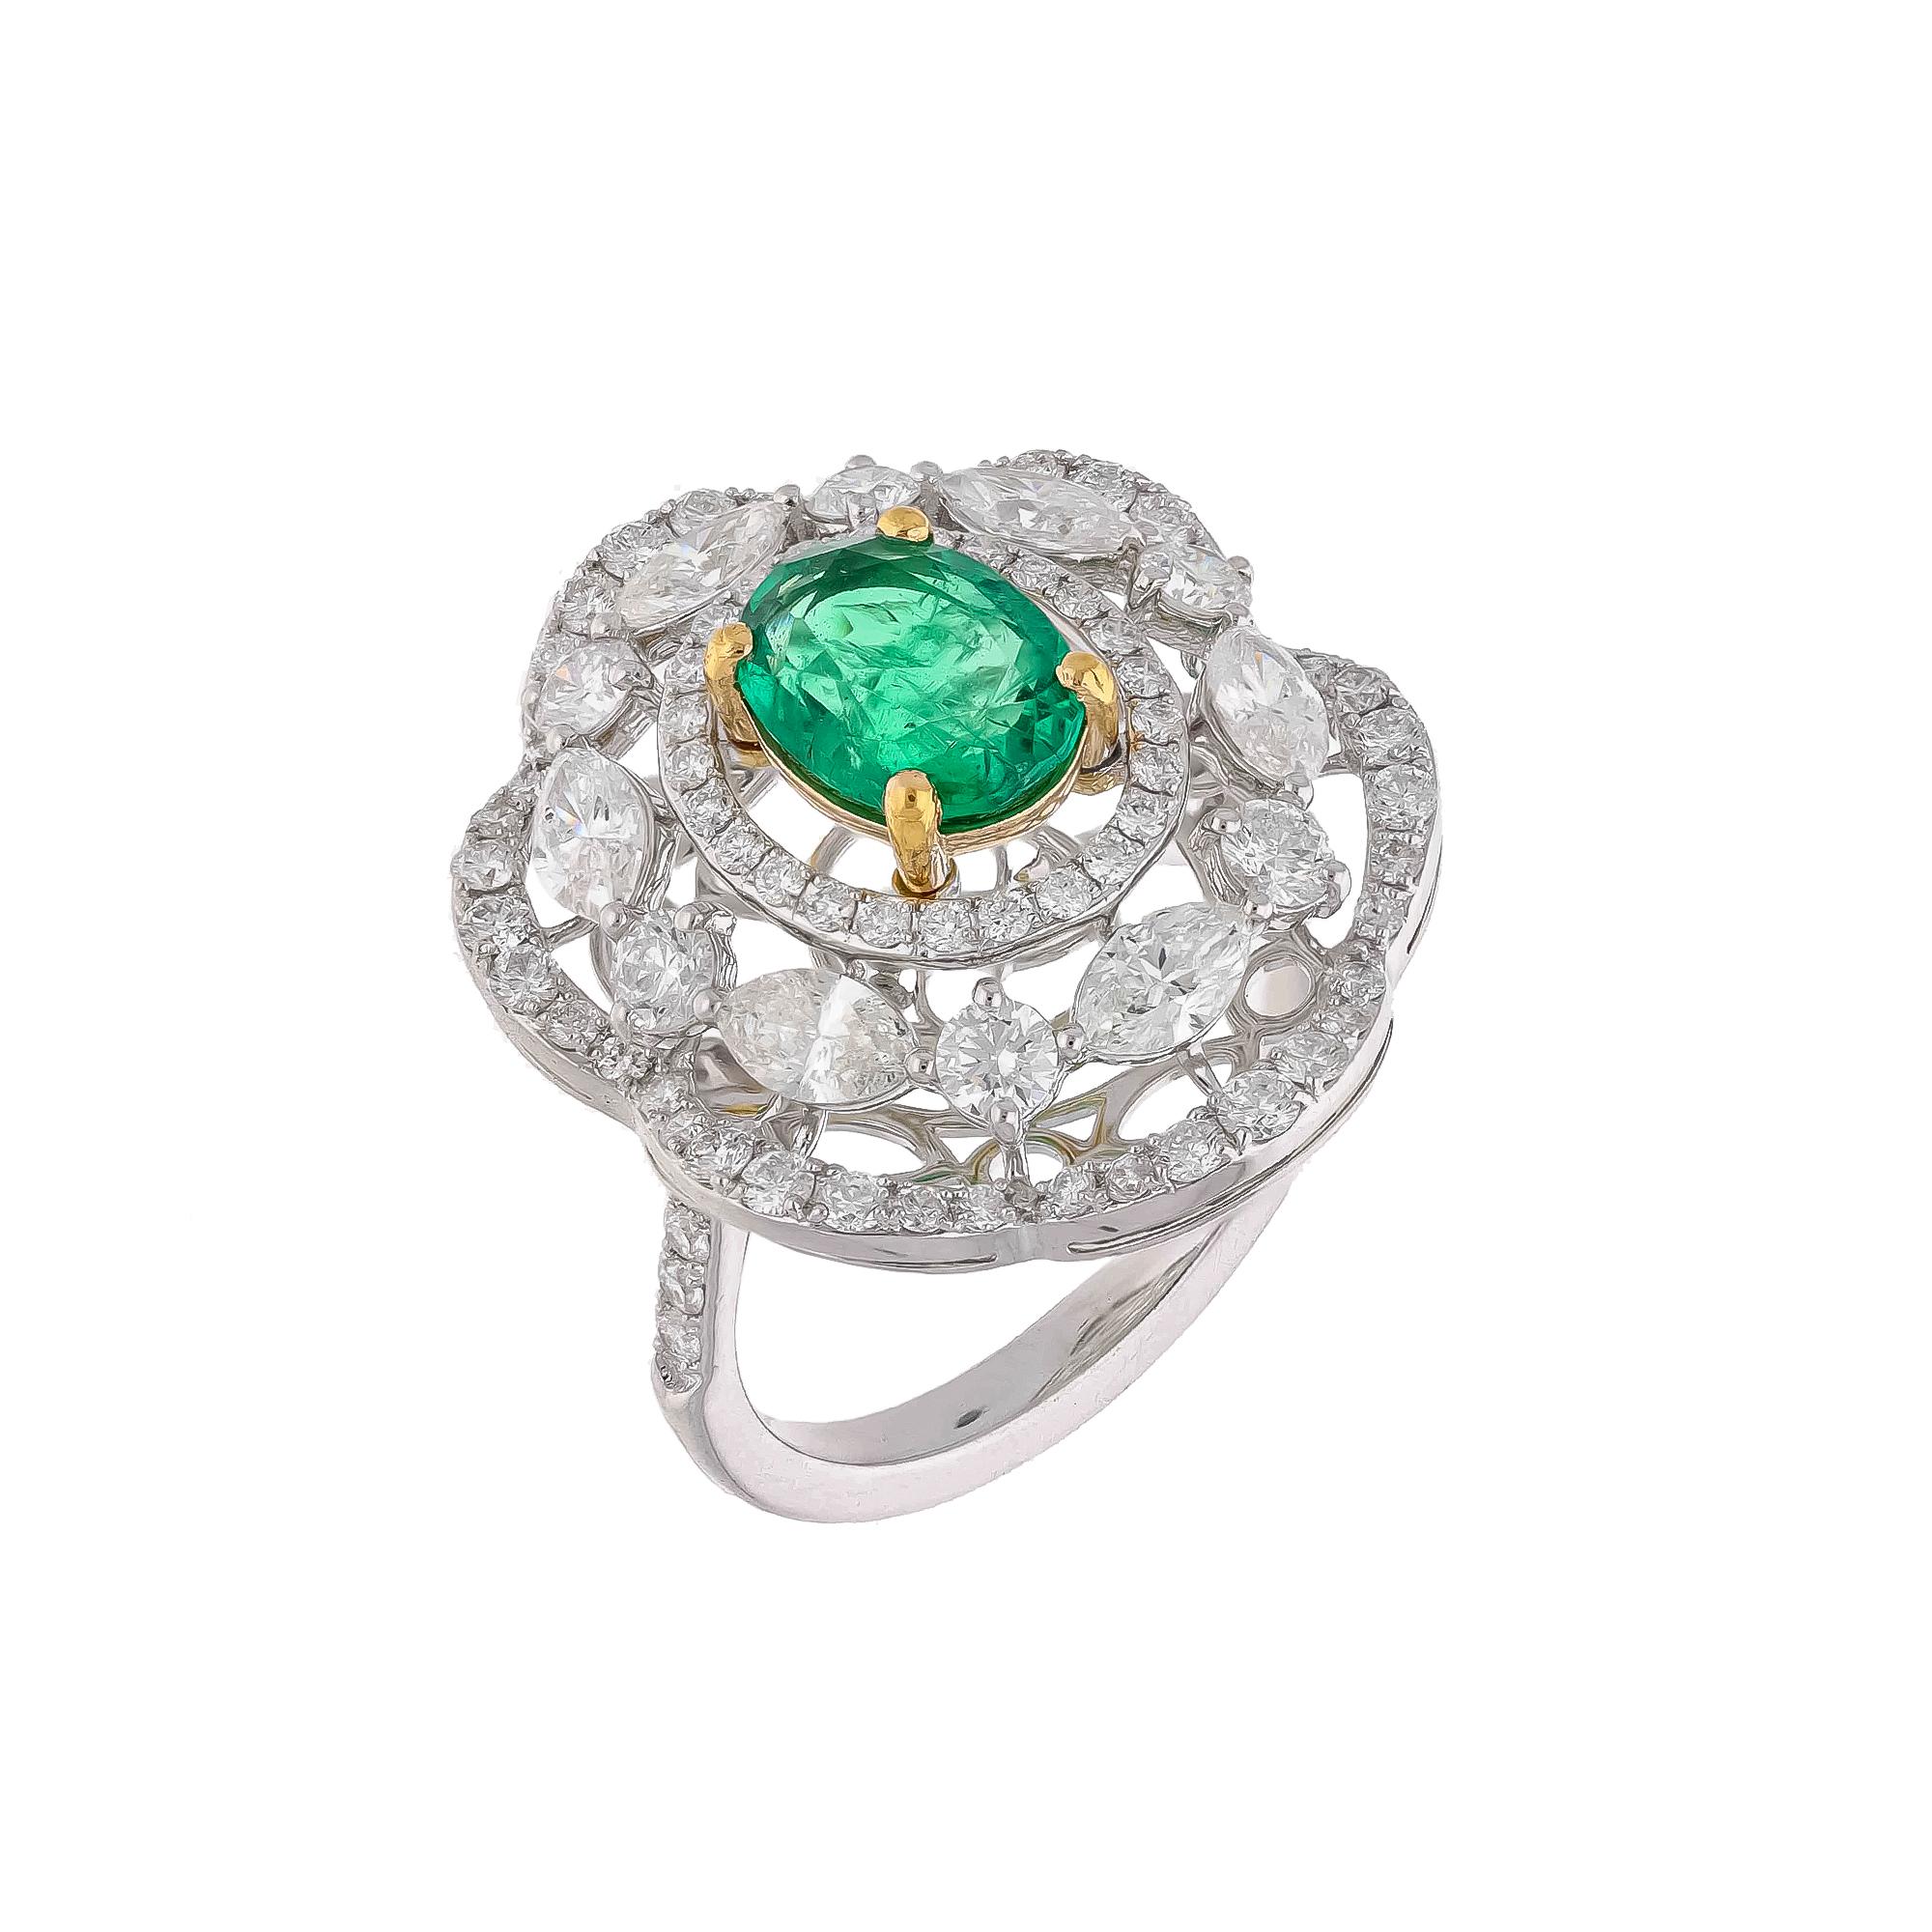 Women's Natural Zambian Emerald Ring with Diamond and 18k Gold For Sale